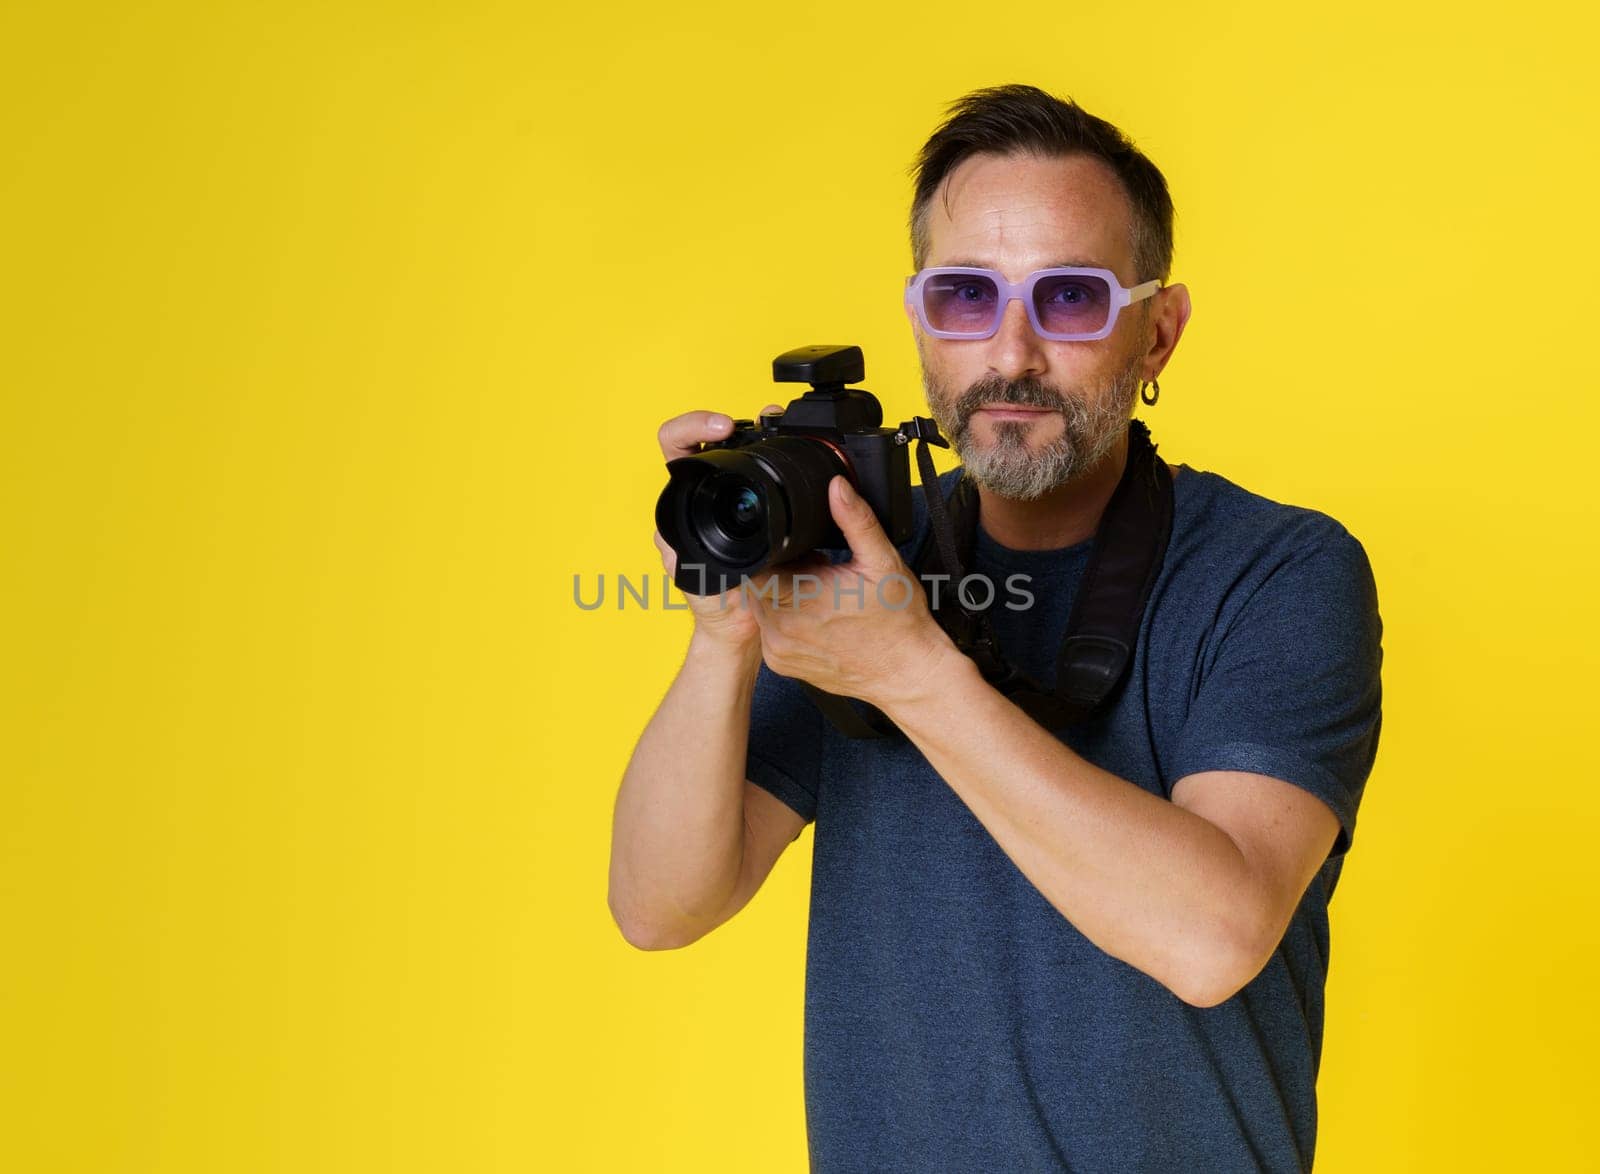 Stylish and creative mid-aged photographer with mirrorless camera against yellow background. Purple glasses adding touch of flair, modern and artistic photographer who involved both style and creativity. by LipikStockMedia